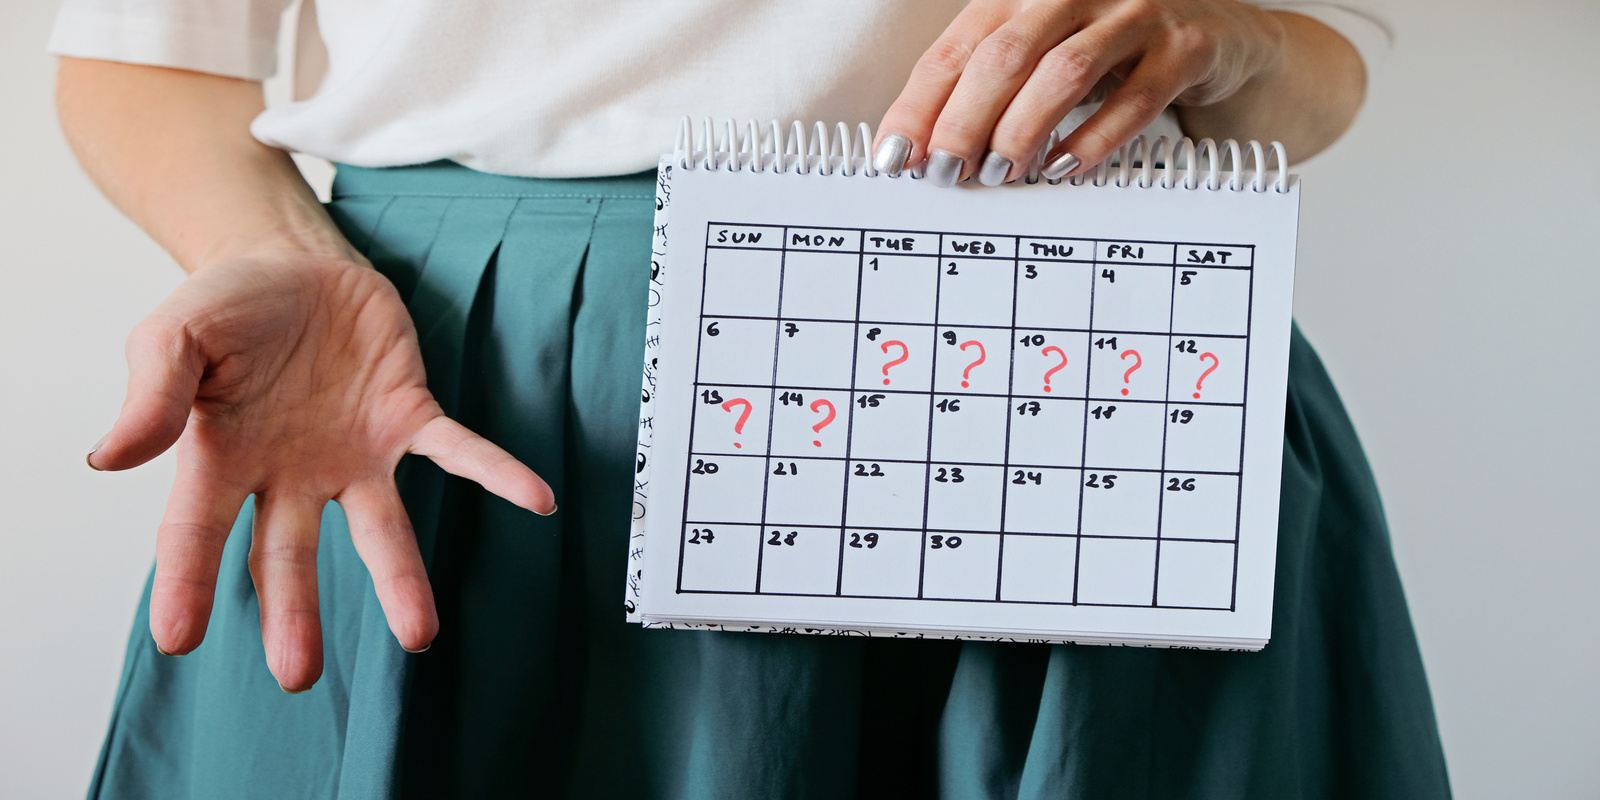 A woman in school uniform holding a calendar that shows missed periods